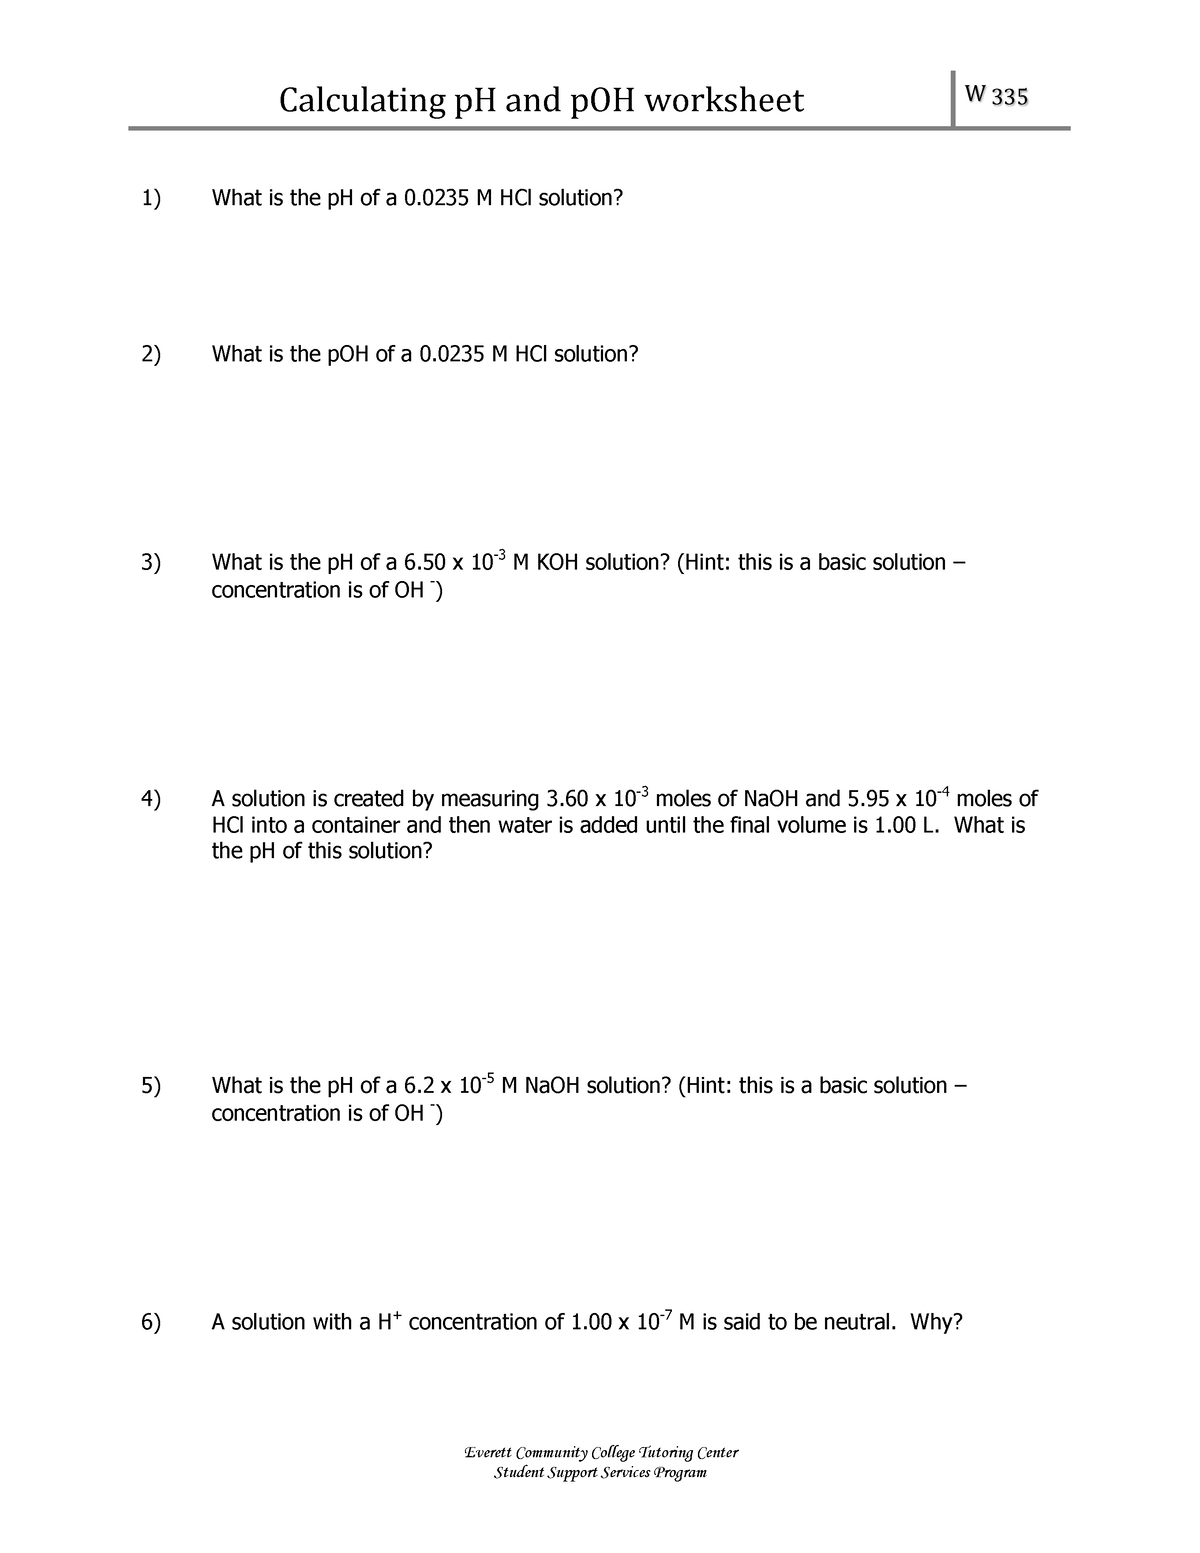 calculating-p-h-and-p-oh-worksheet-calculating-ph-and-poh-worksheet-w